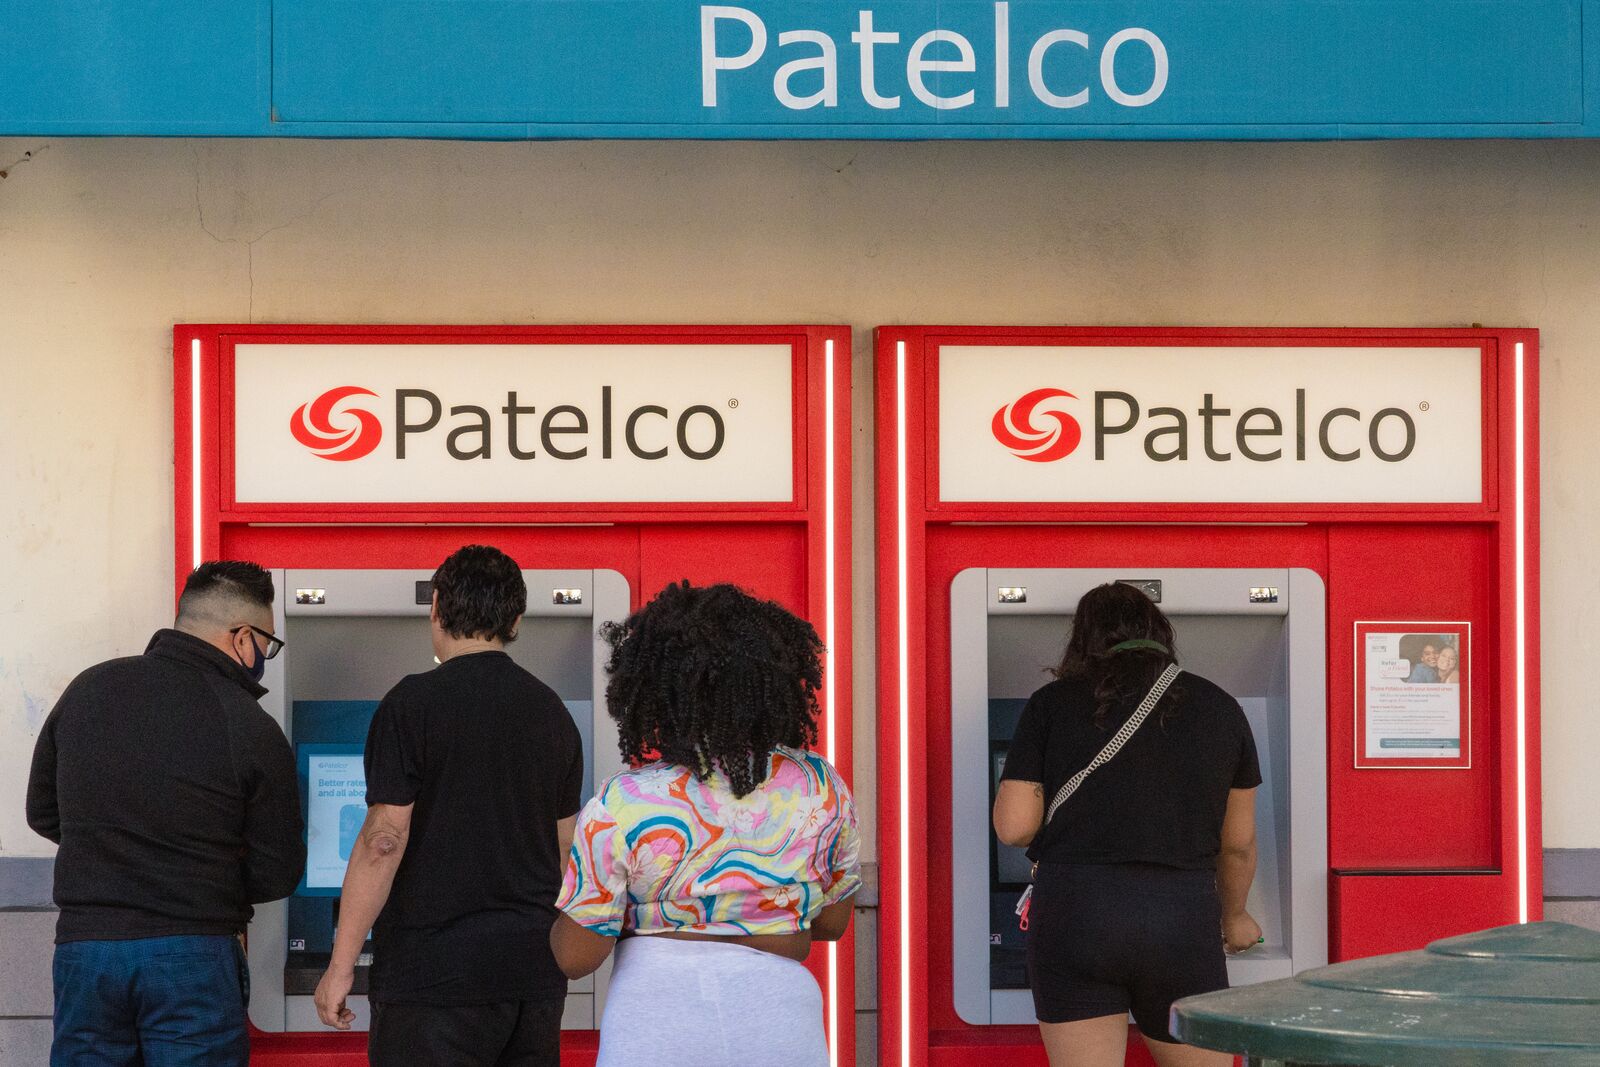 Patelco tells customers checks will be honored, but to expect delays